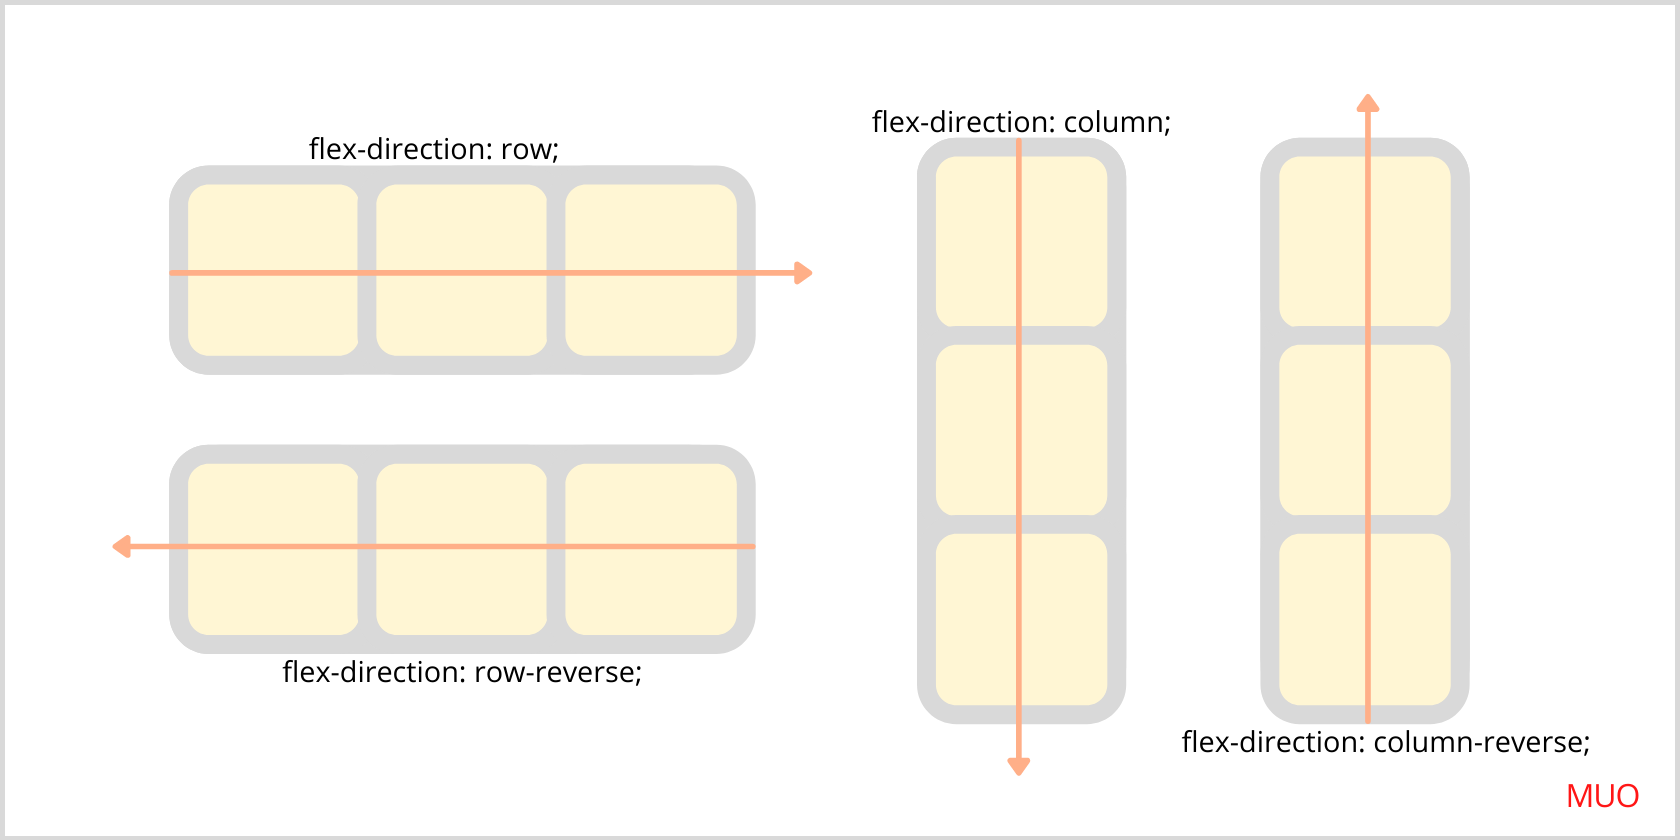 The flex-direction property in CSS